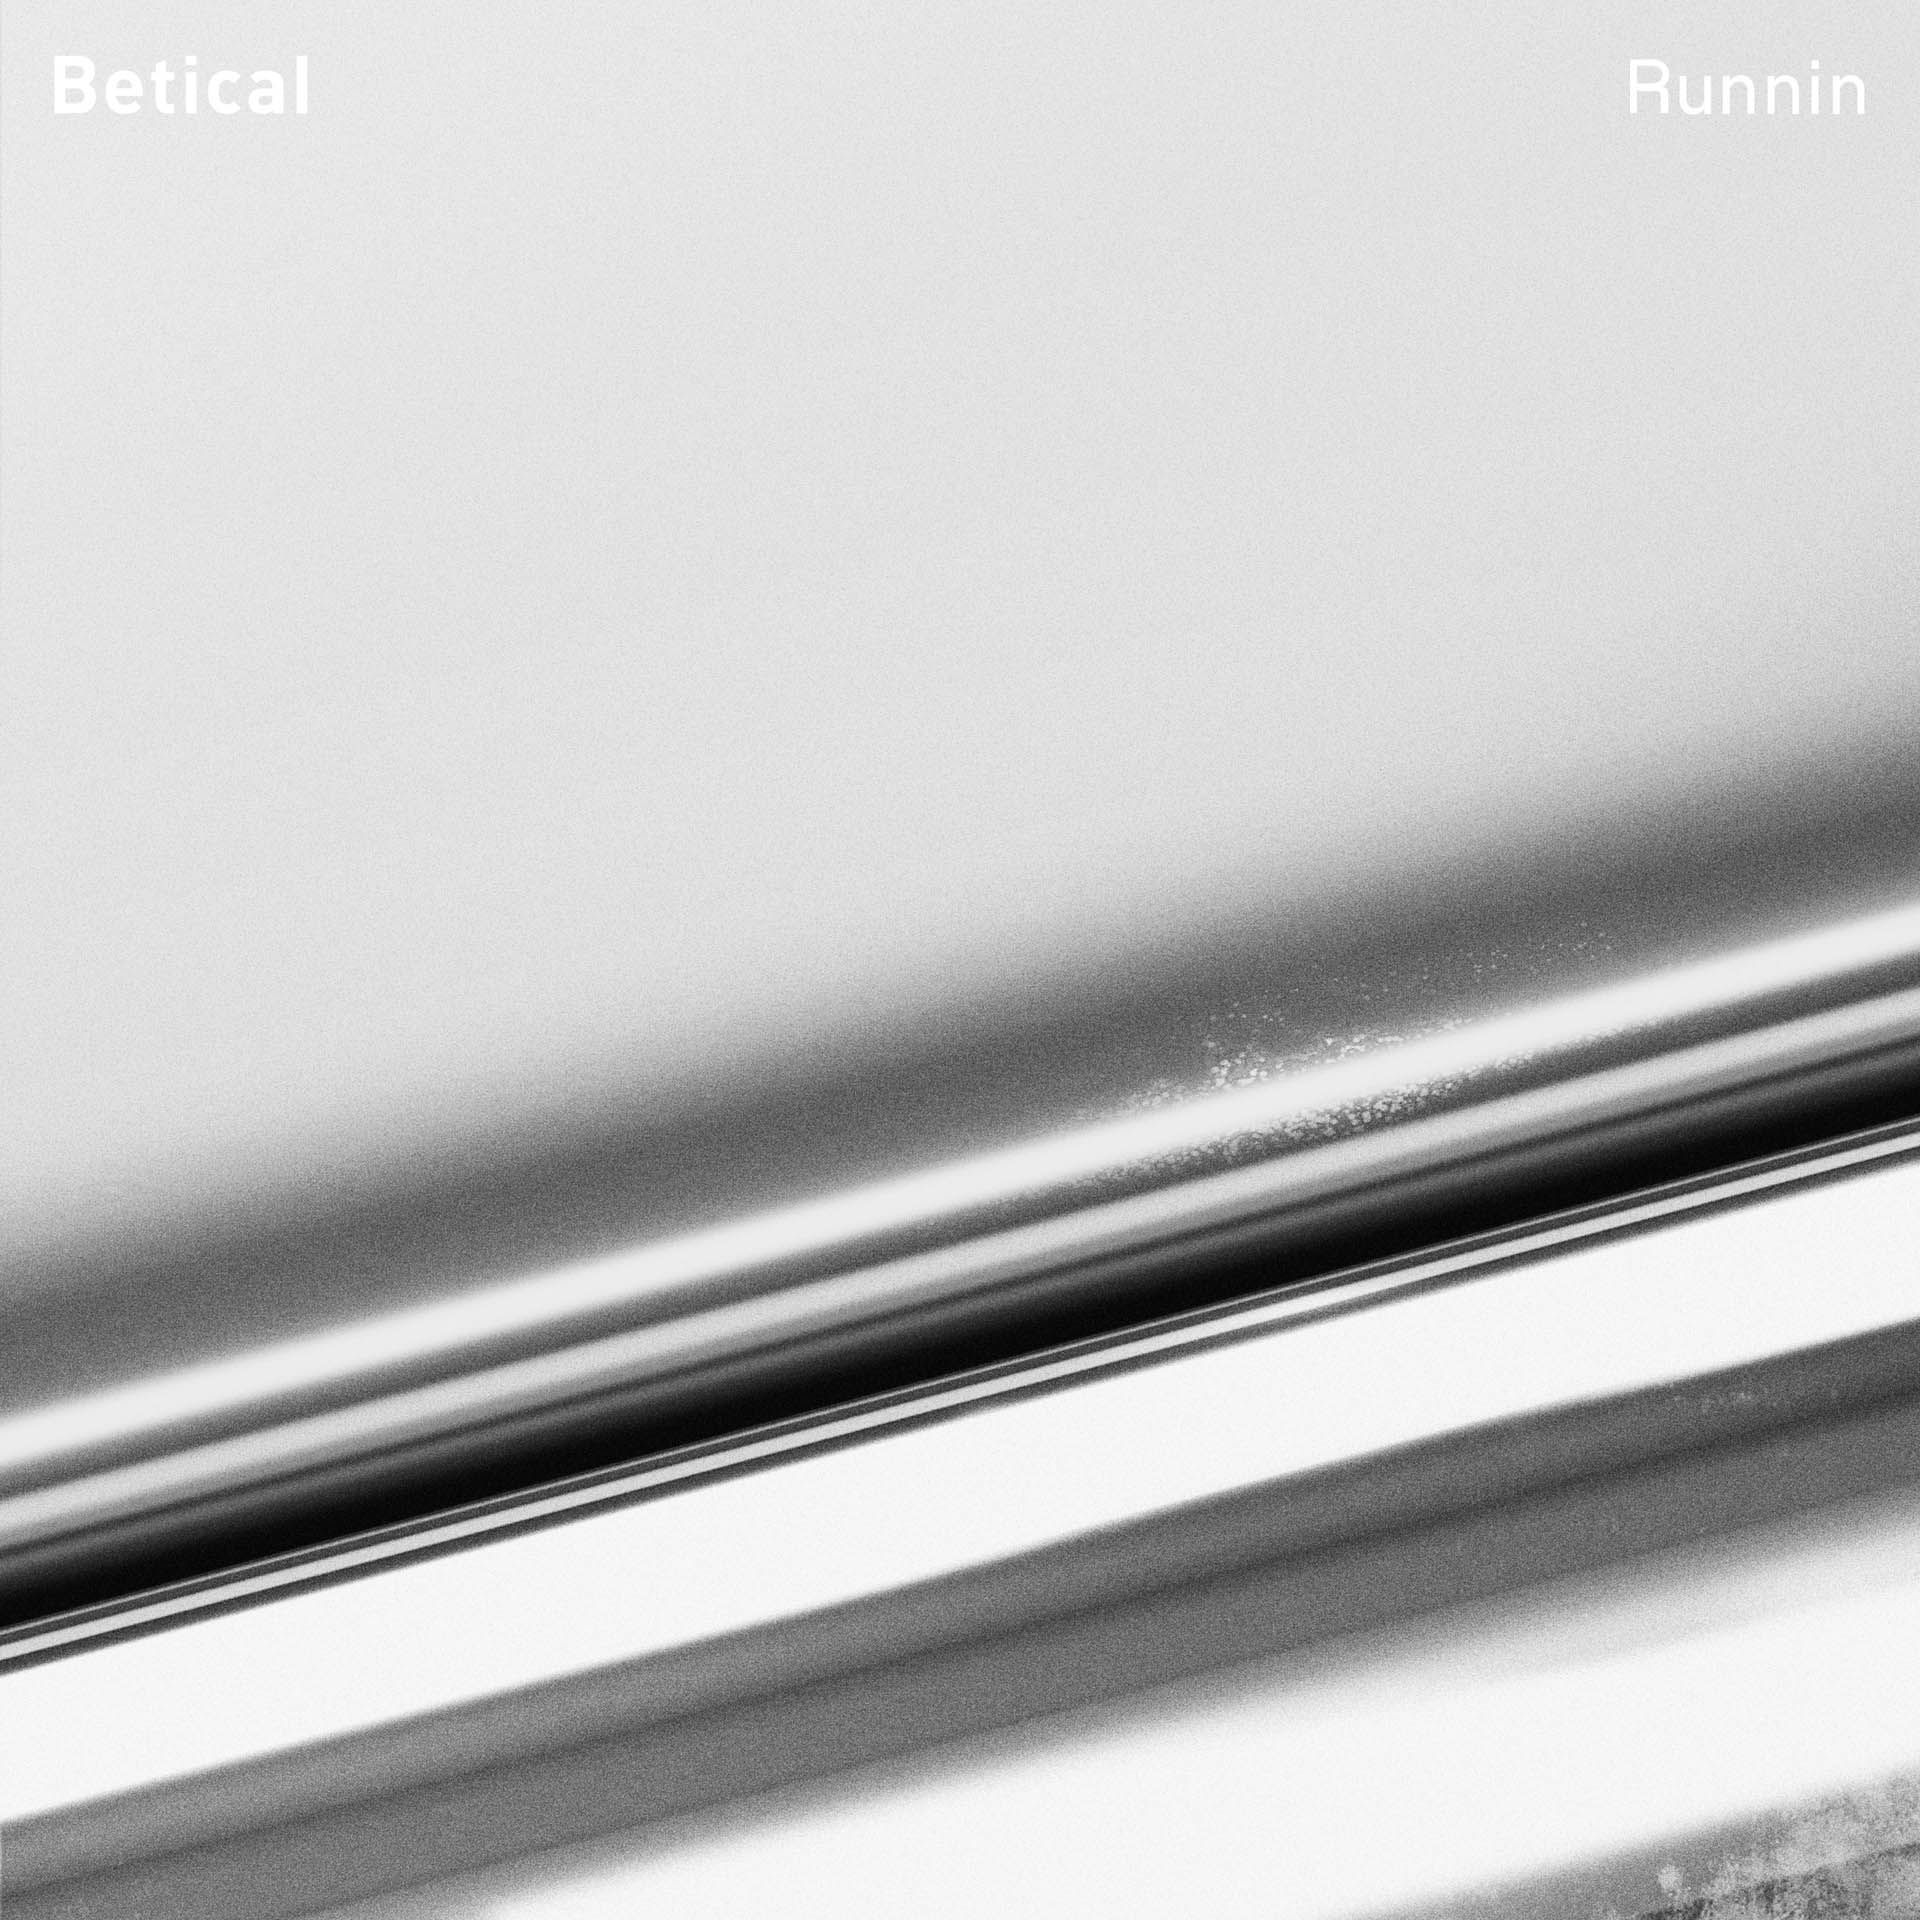 Betical